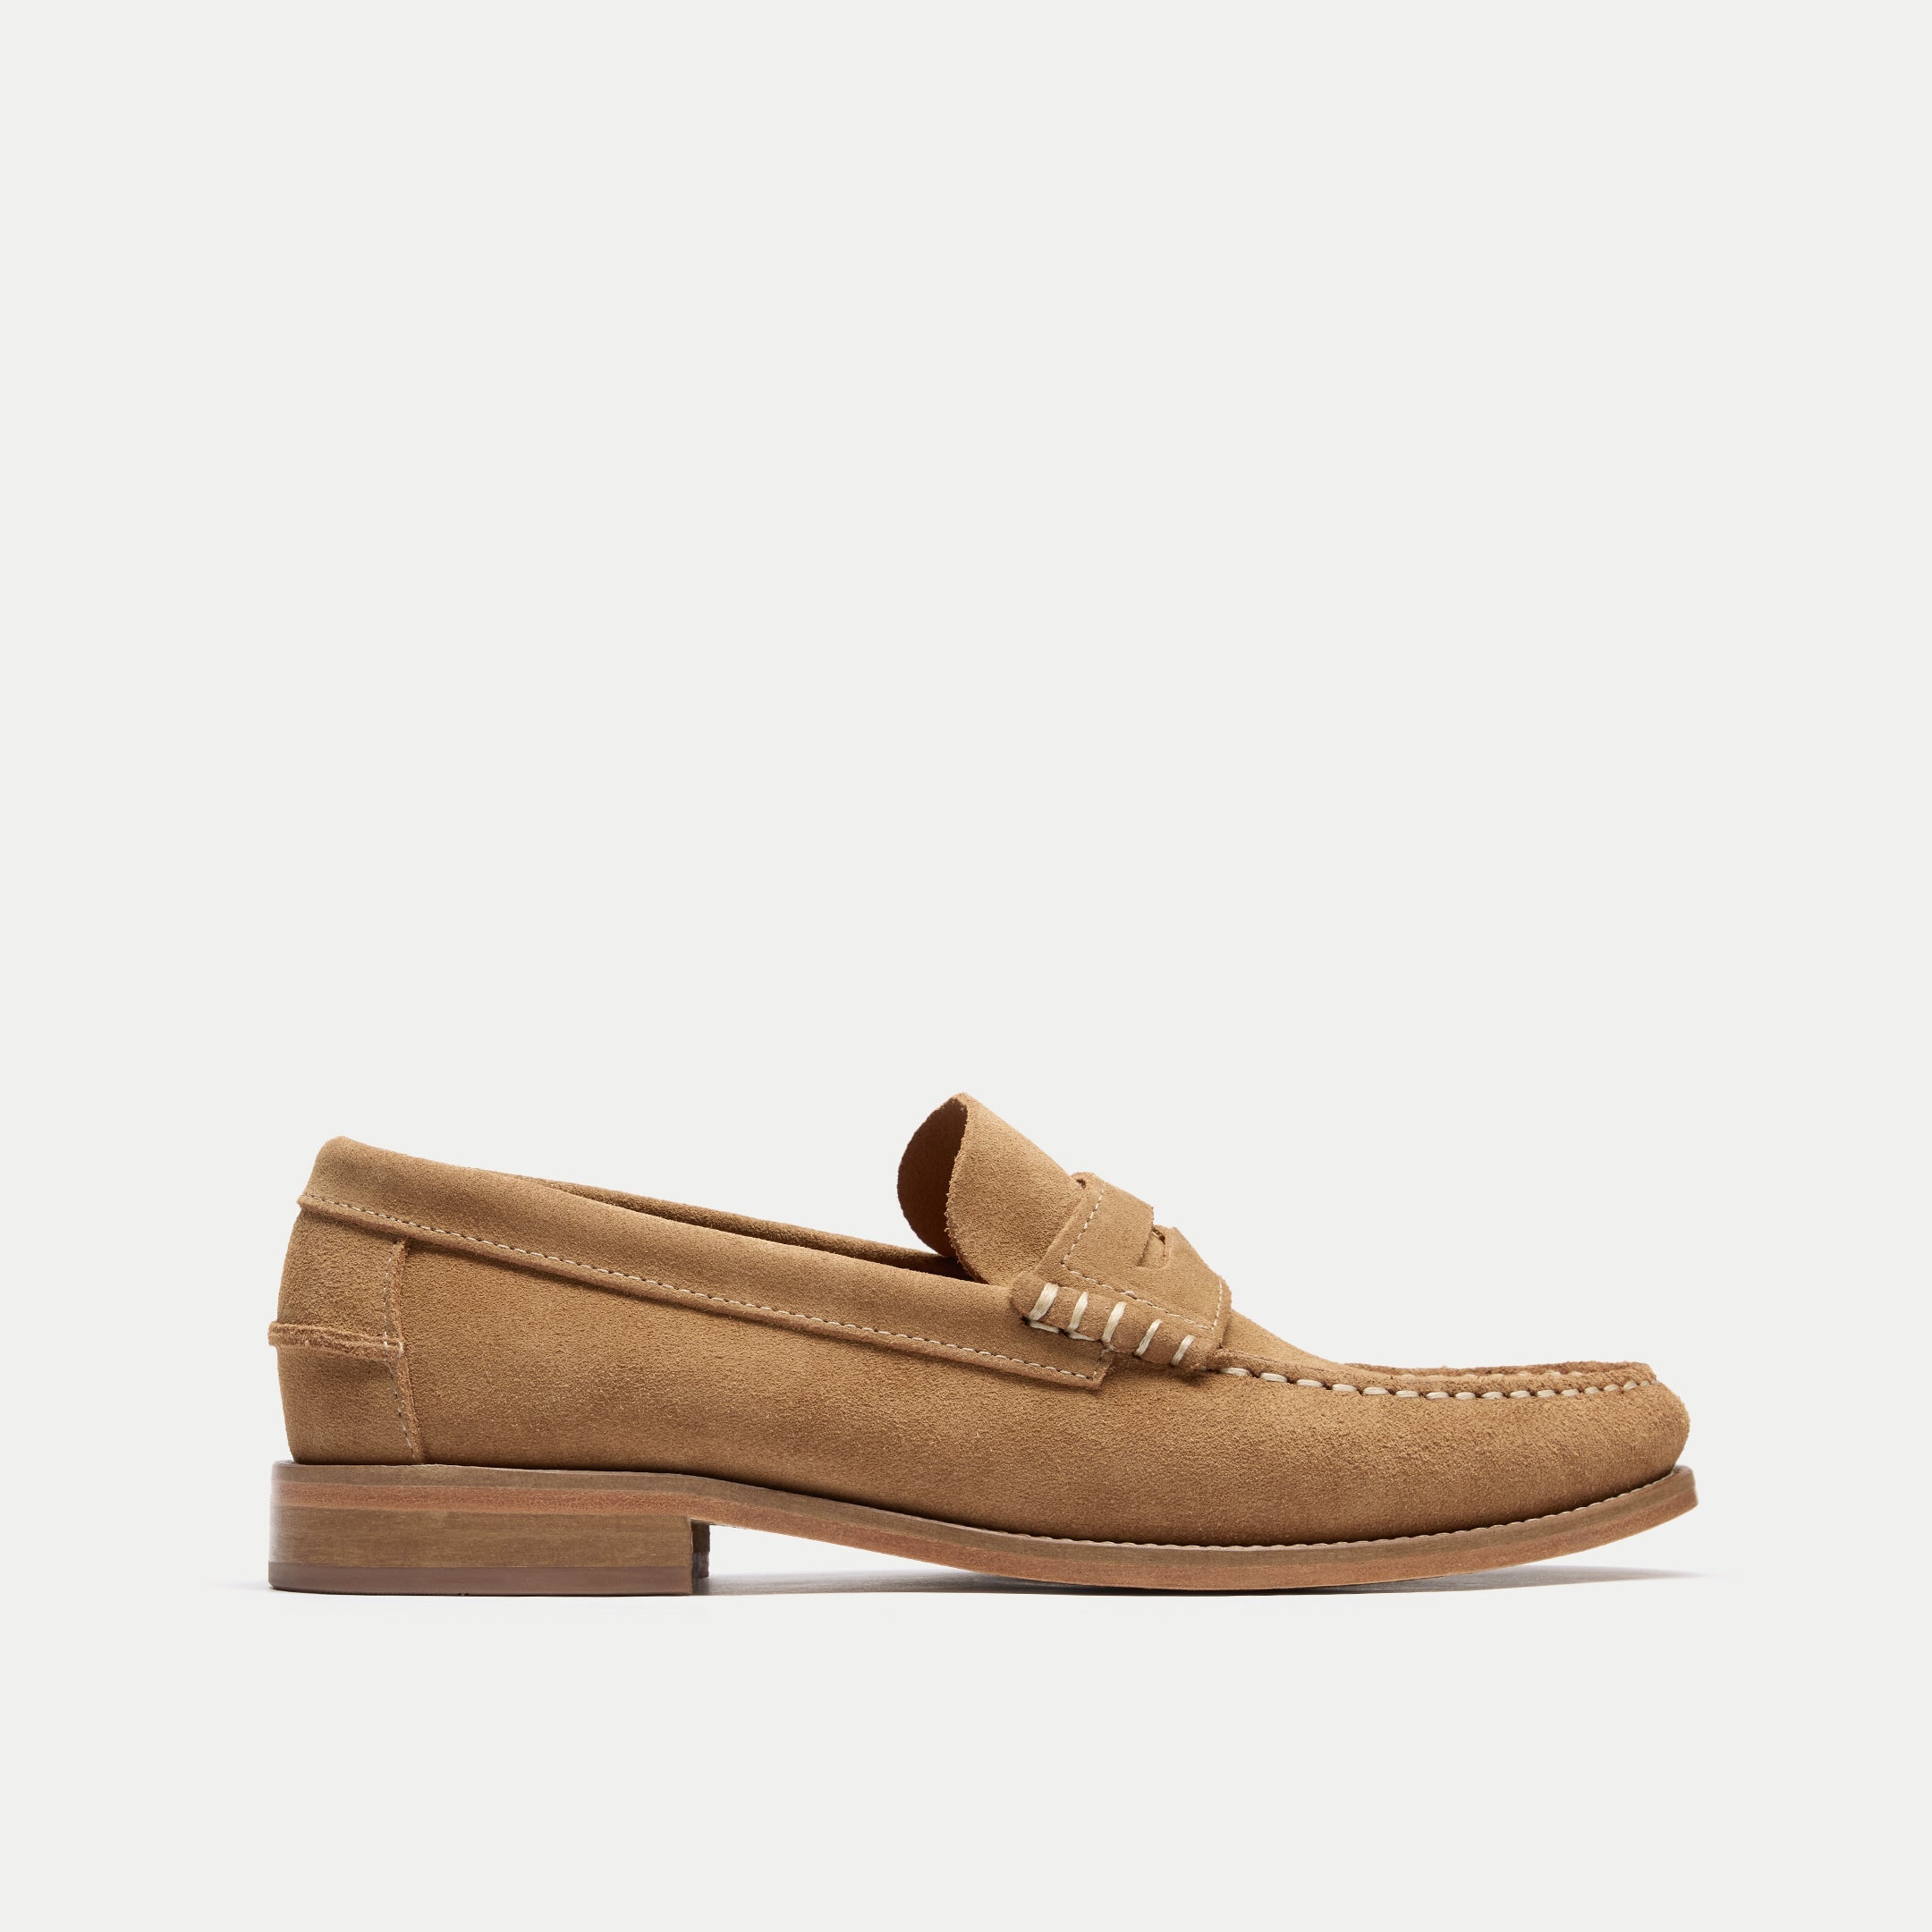 Walk London Mens Dalston Penny Loafer in Tan Suede